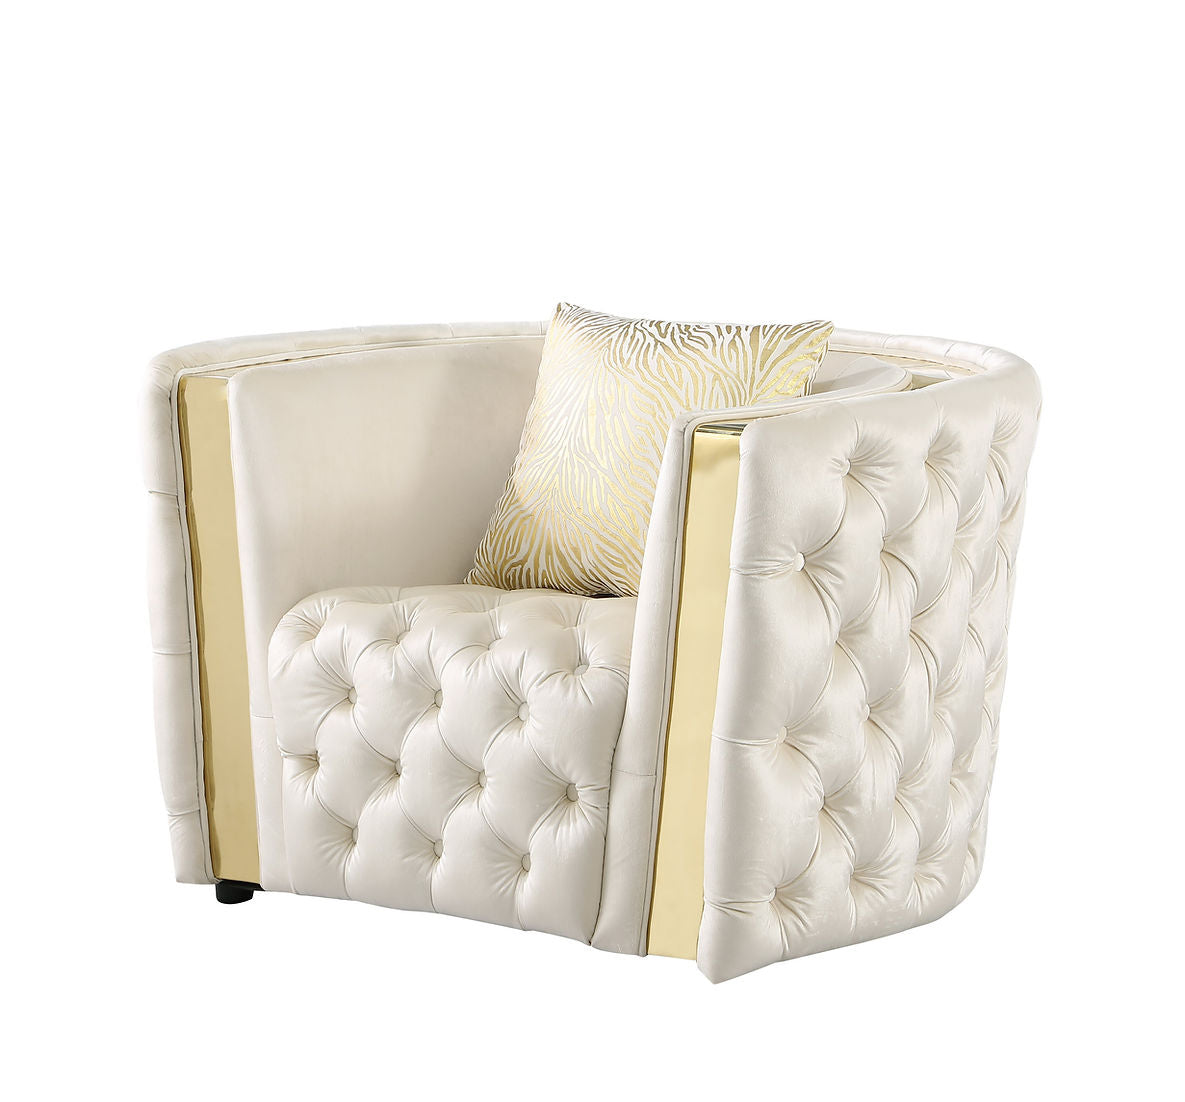 White and gold sofa